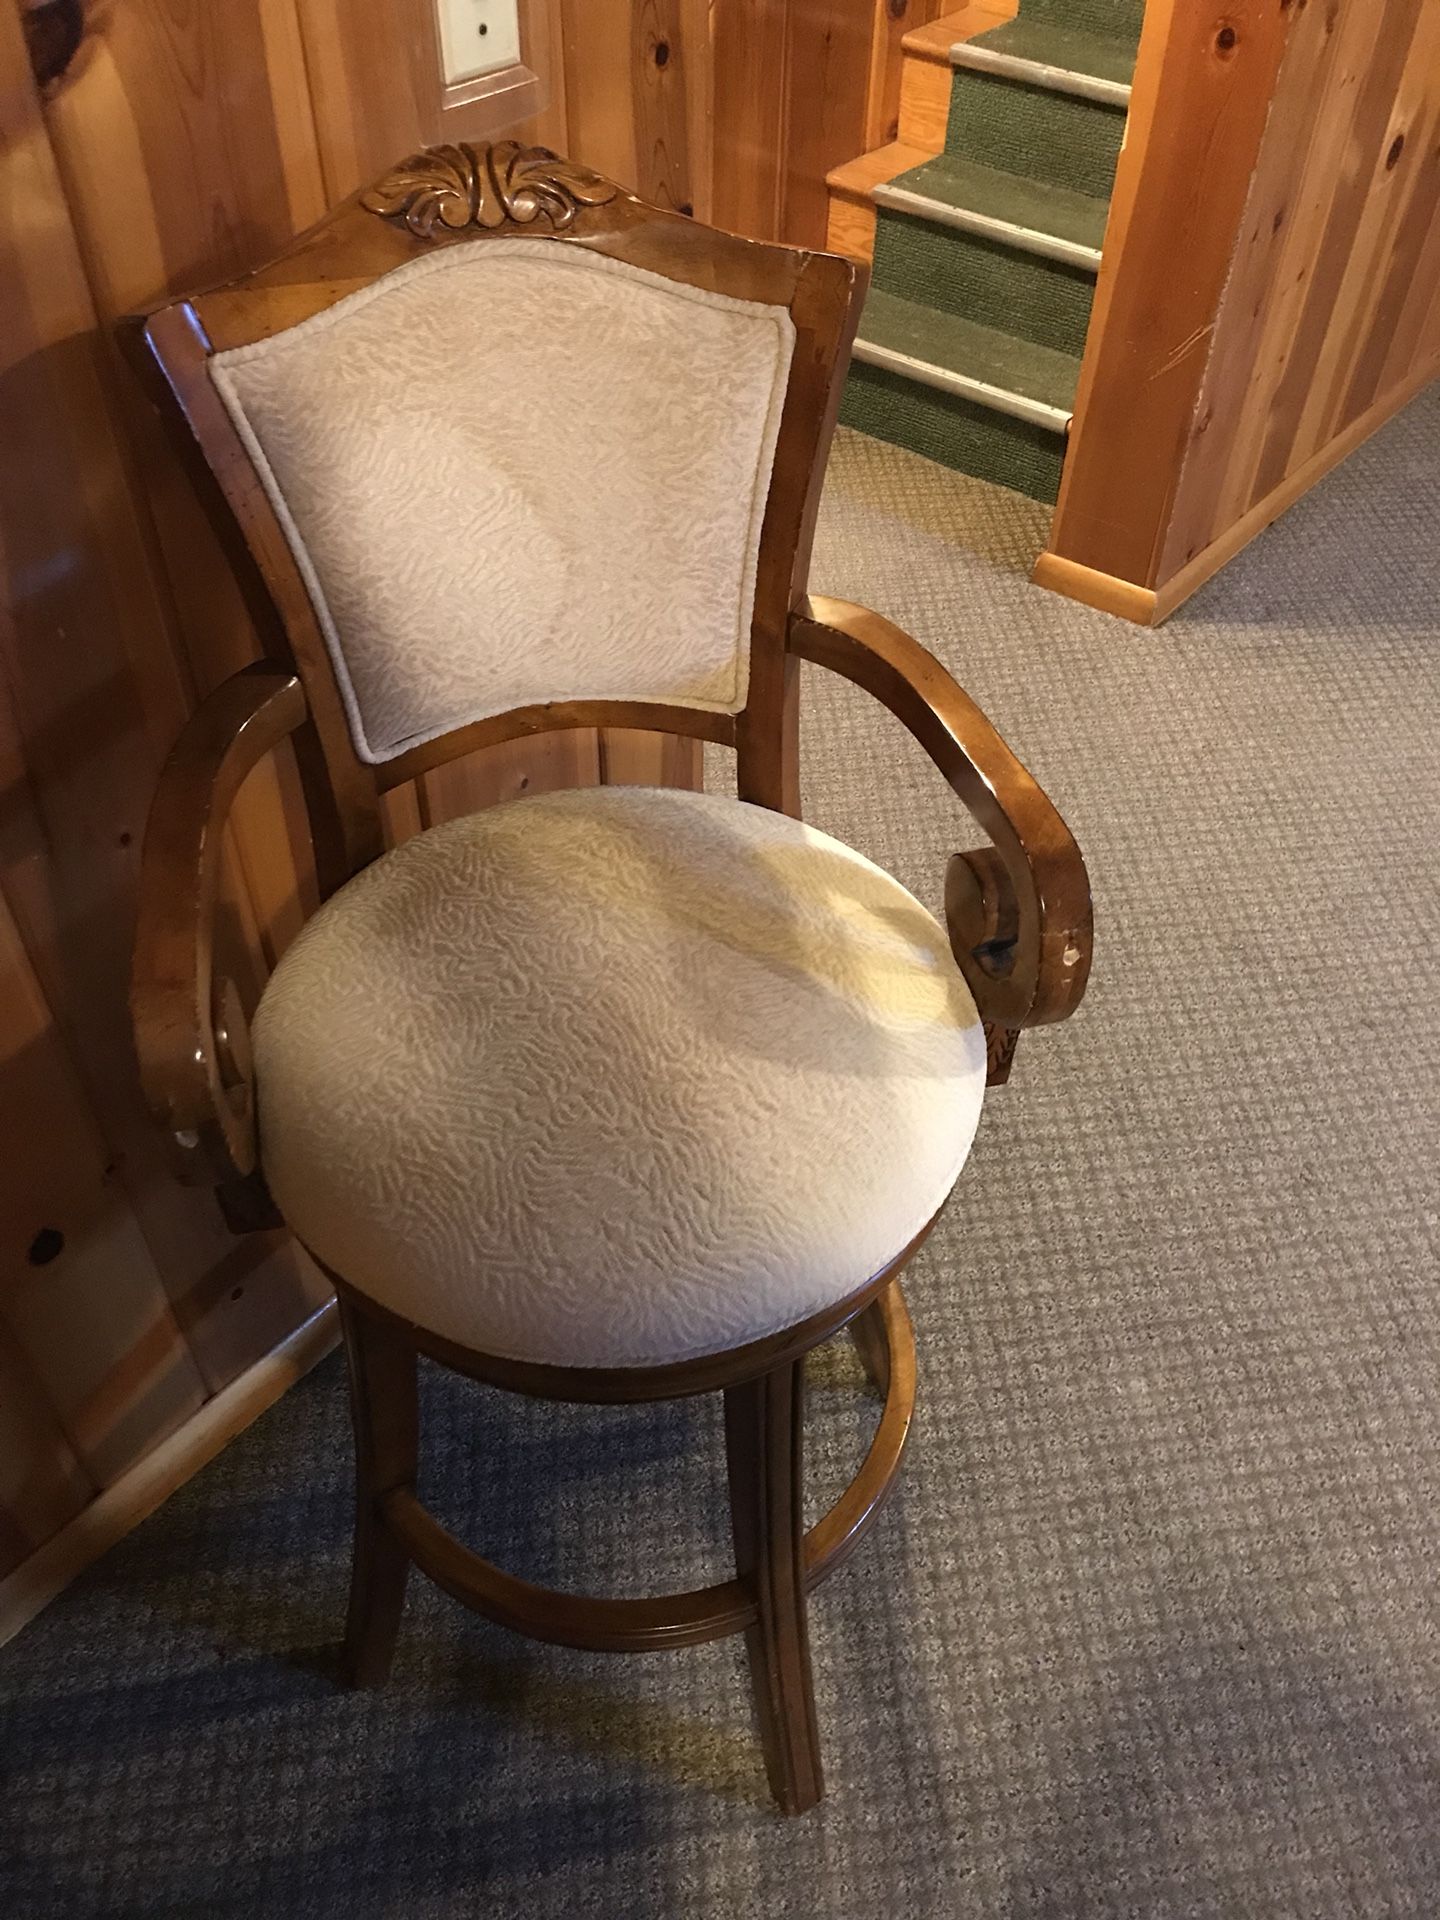 Set of 4 chairs. Good for a bar or pool table area.